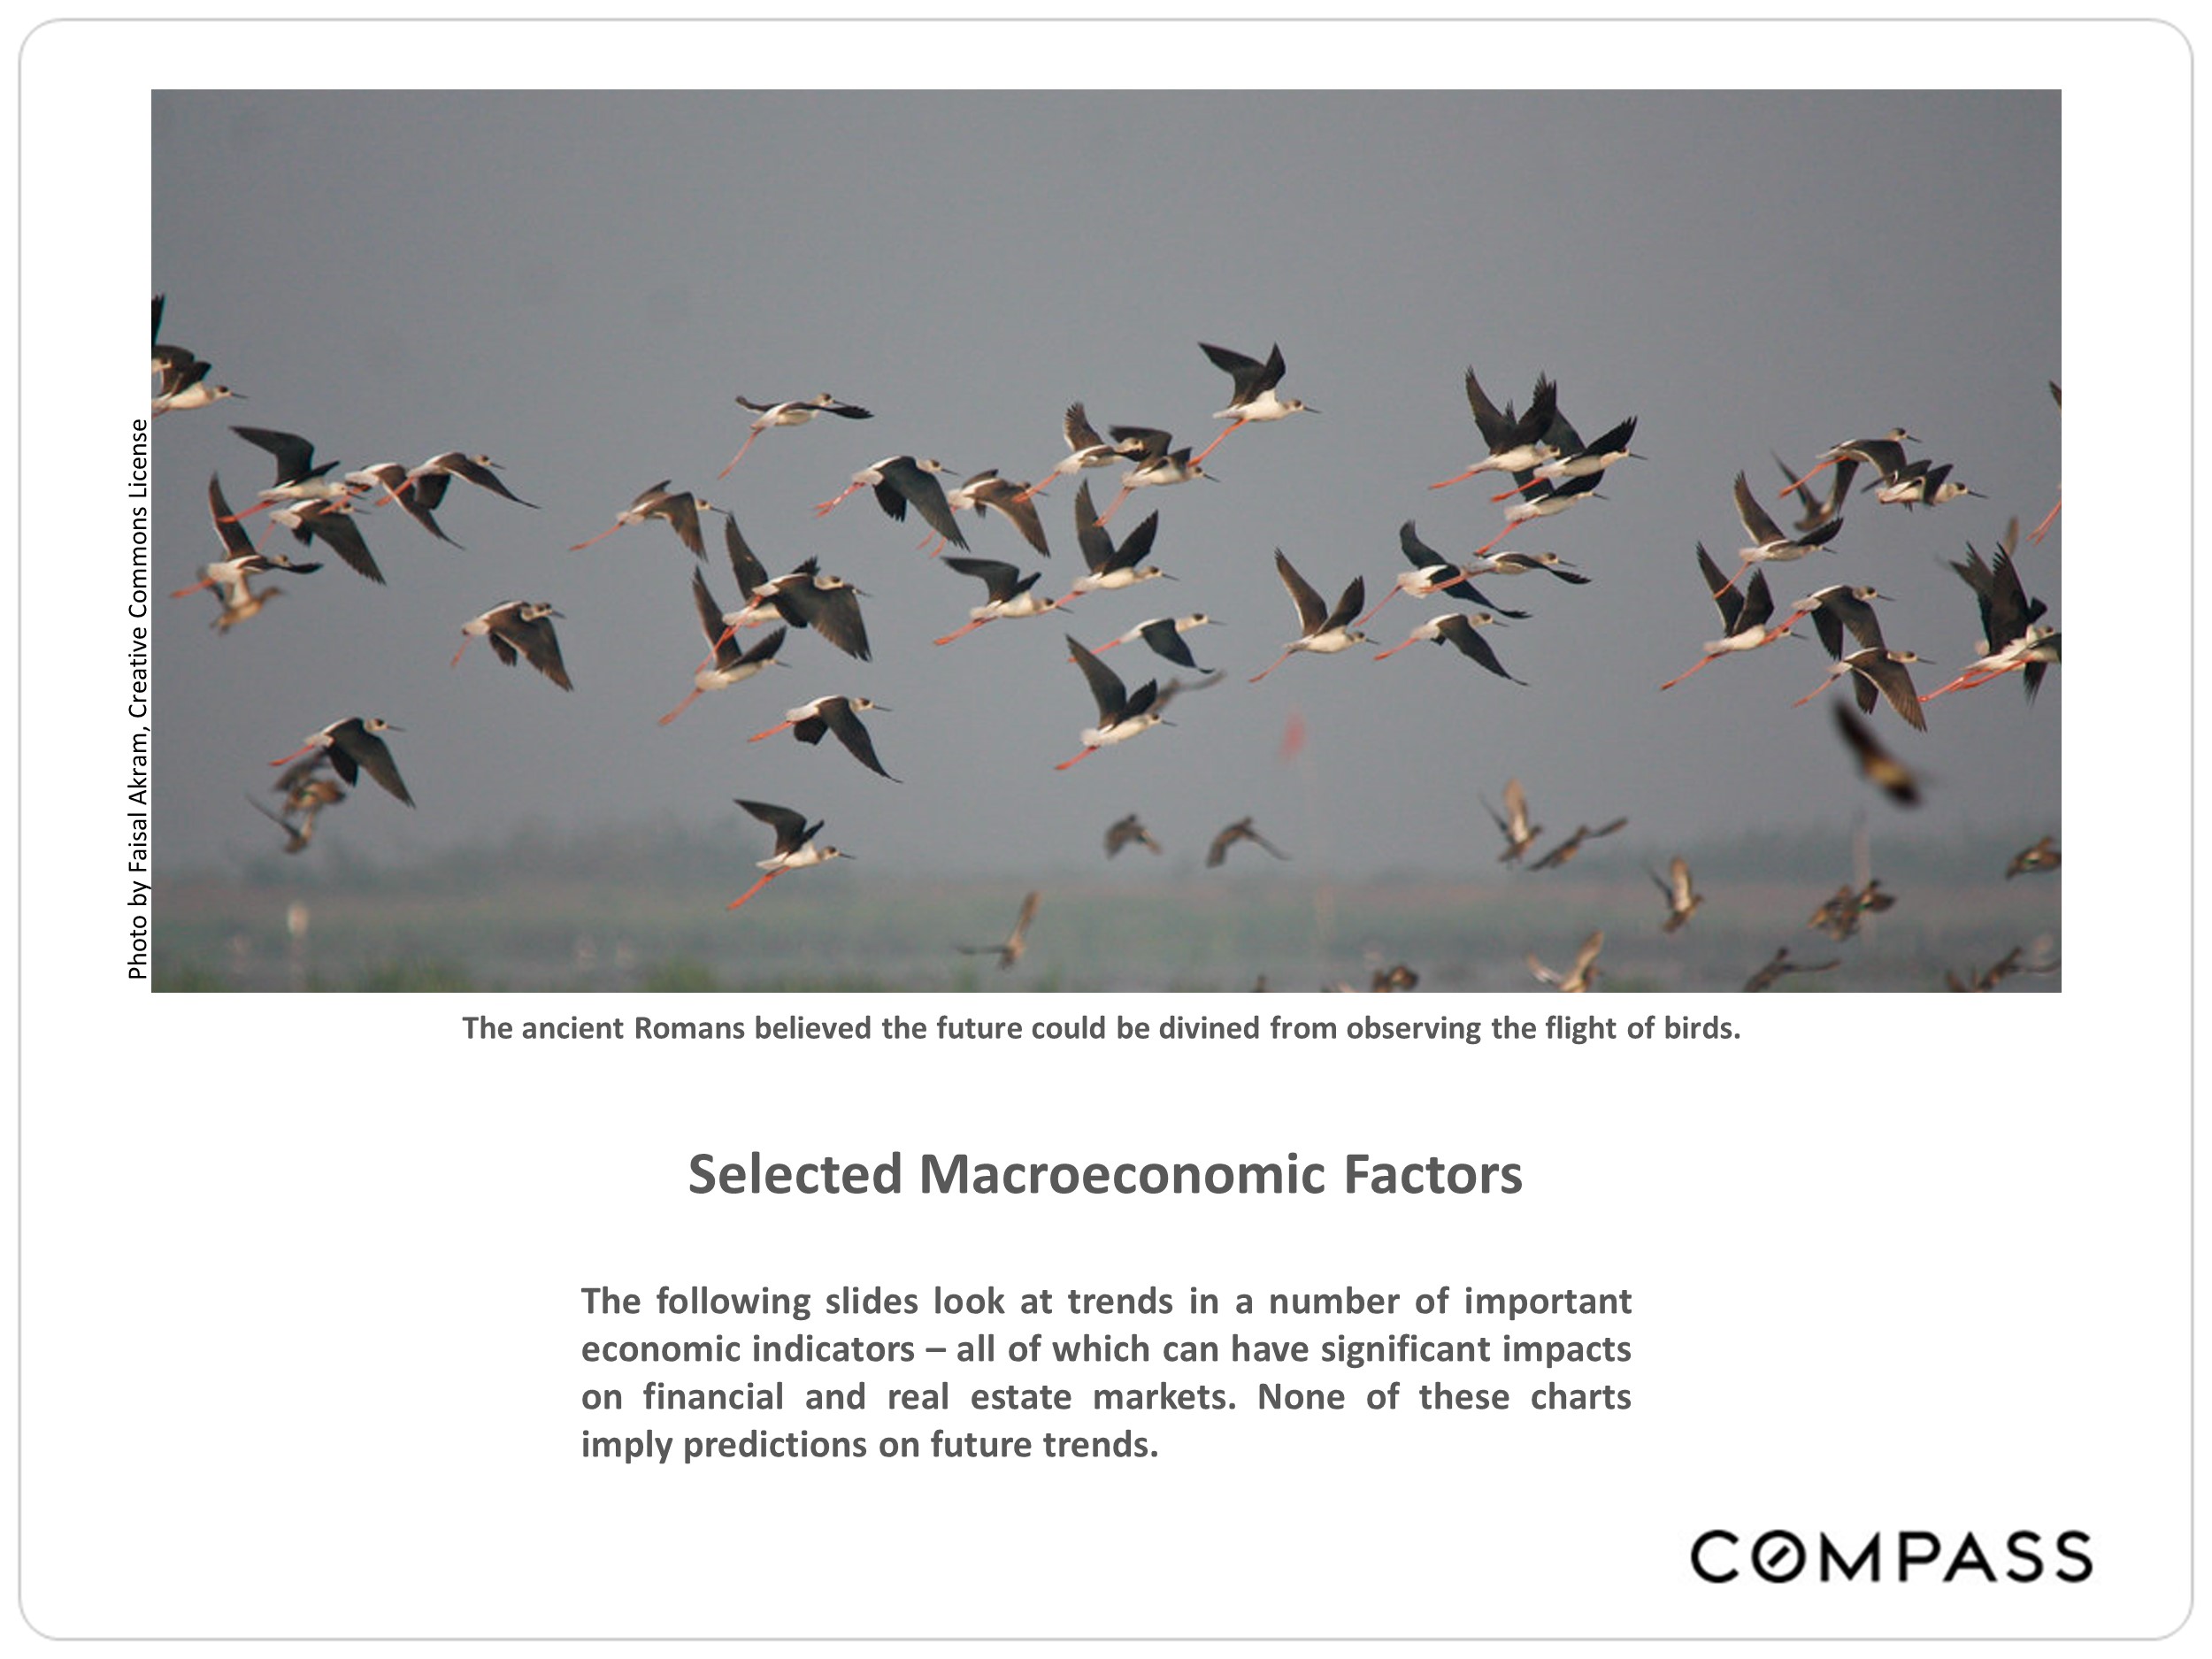 banner image of birds flying over water and text outlining the macroeconomic factors affecting the market in the following slides 